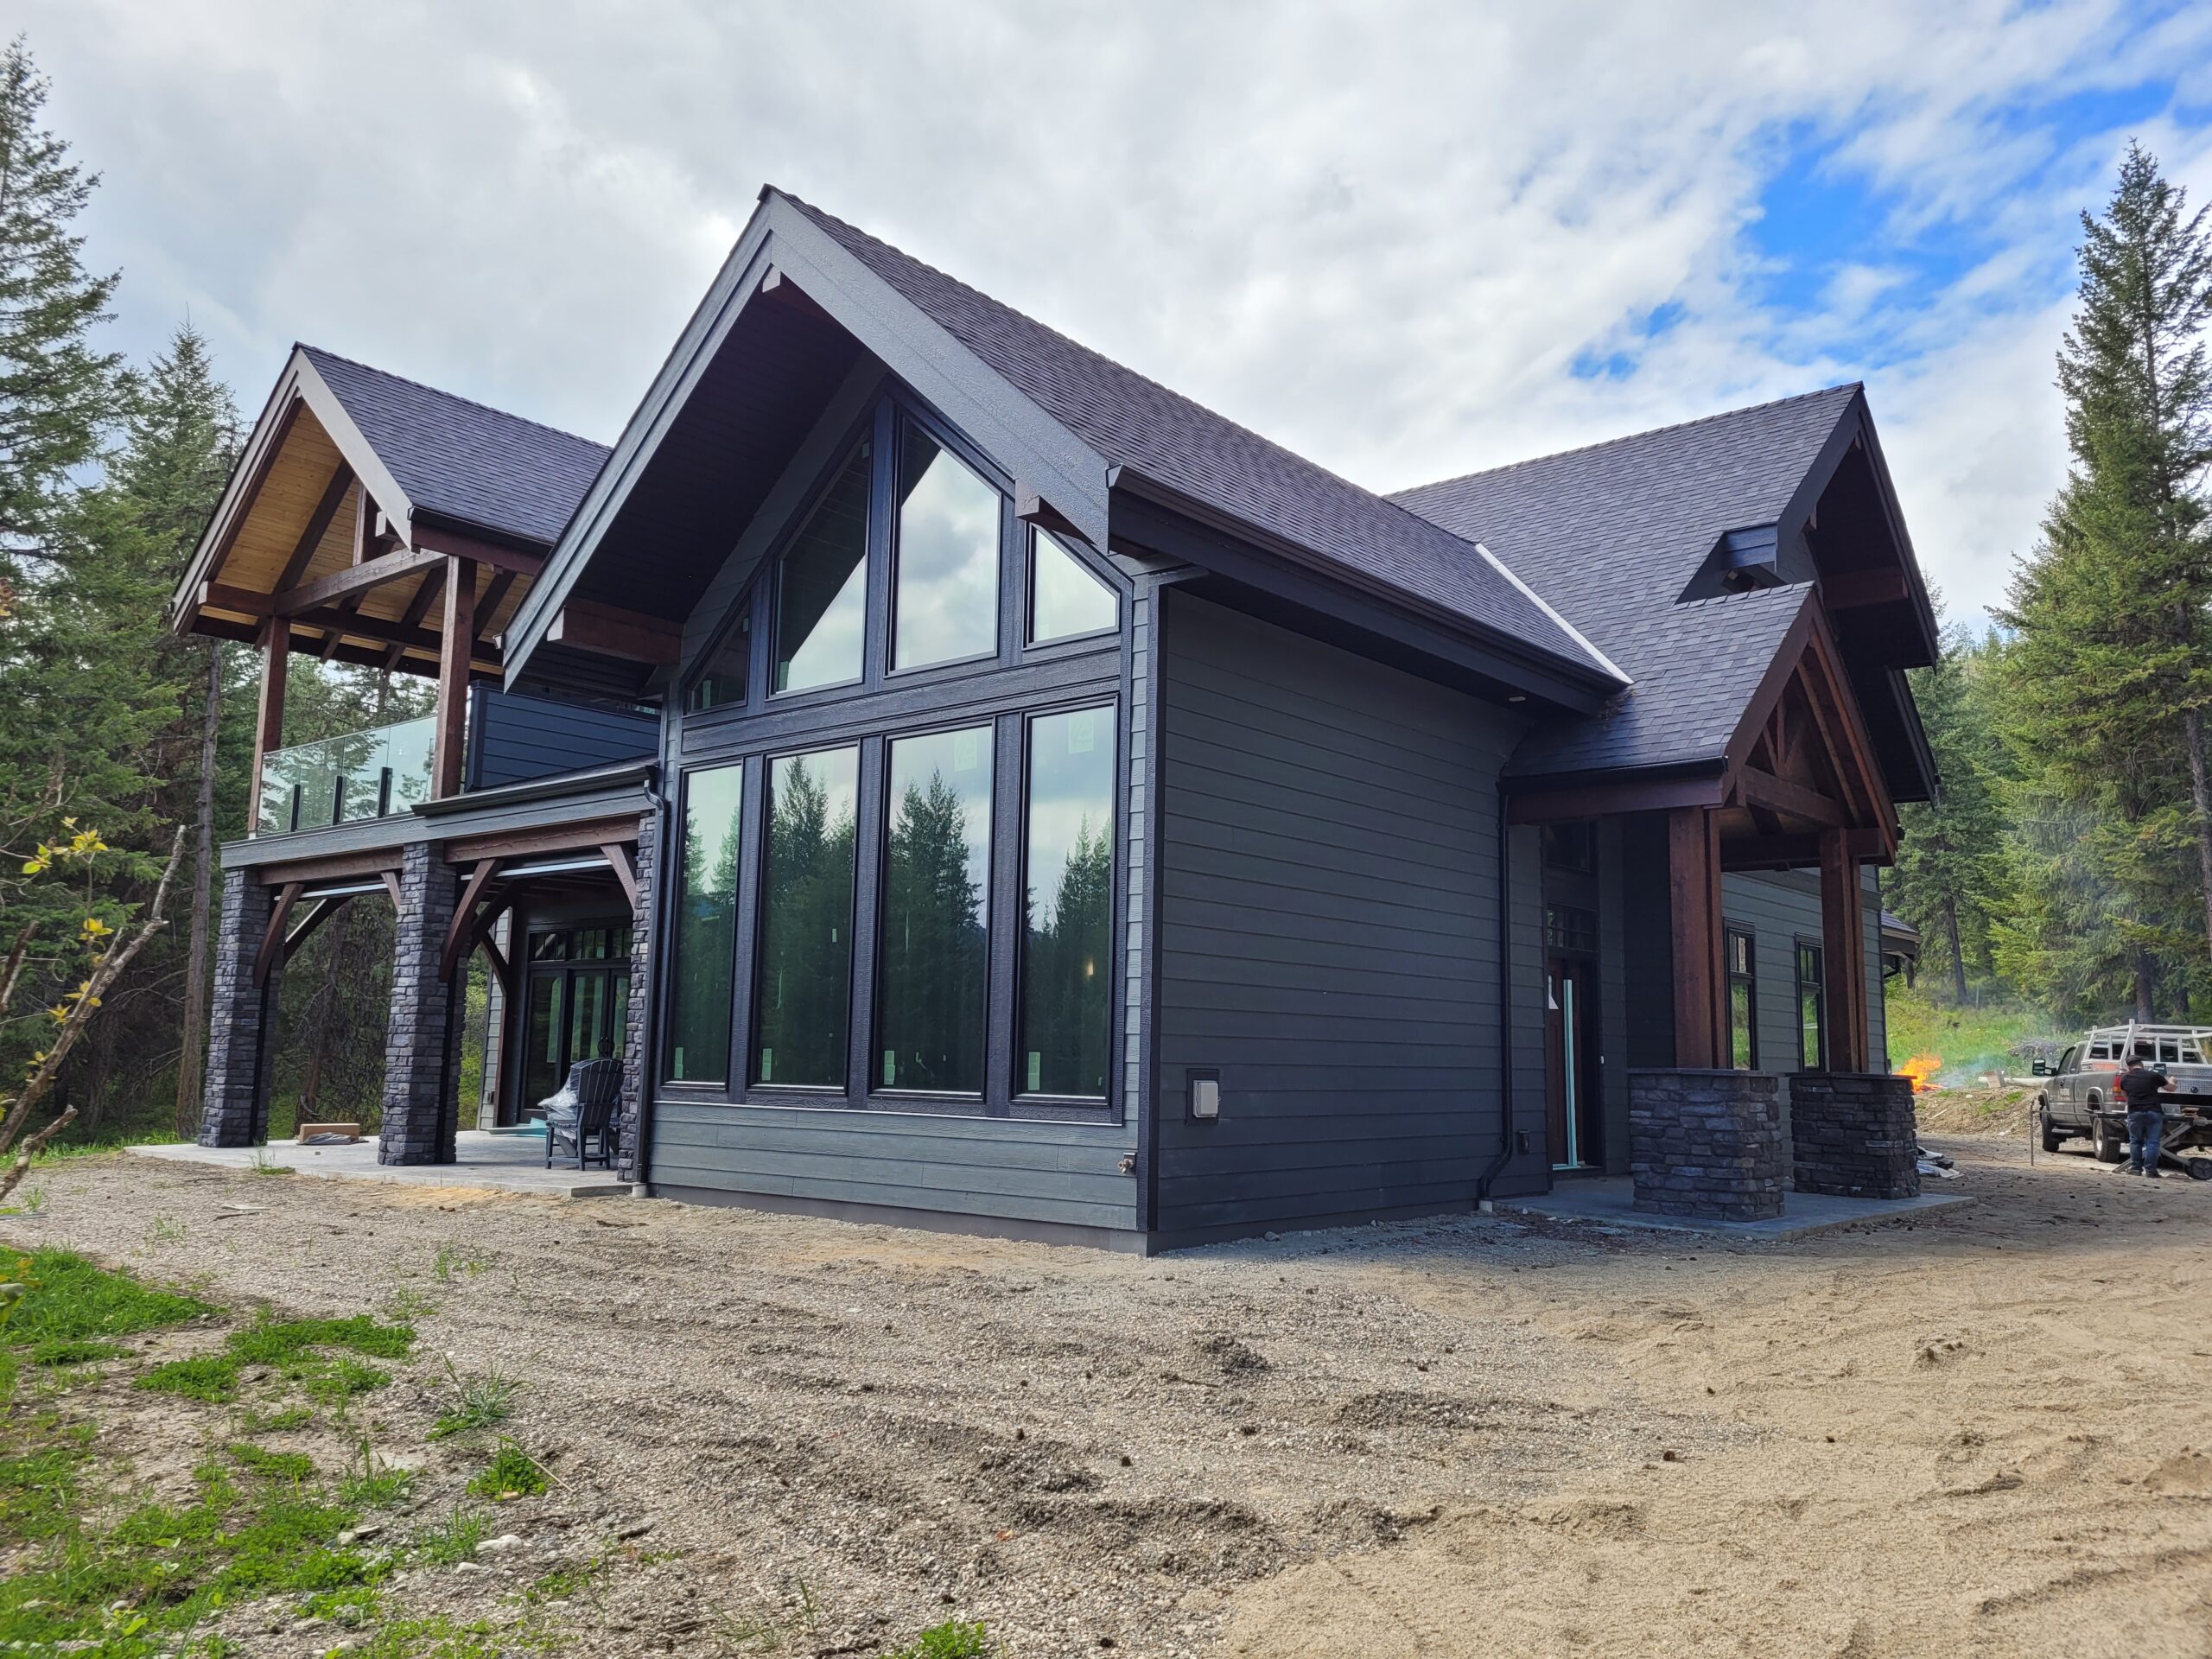 Parsons Family Homes Blog | Newly Built Homes and Renovations